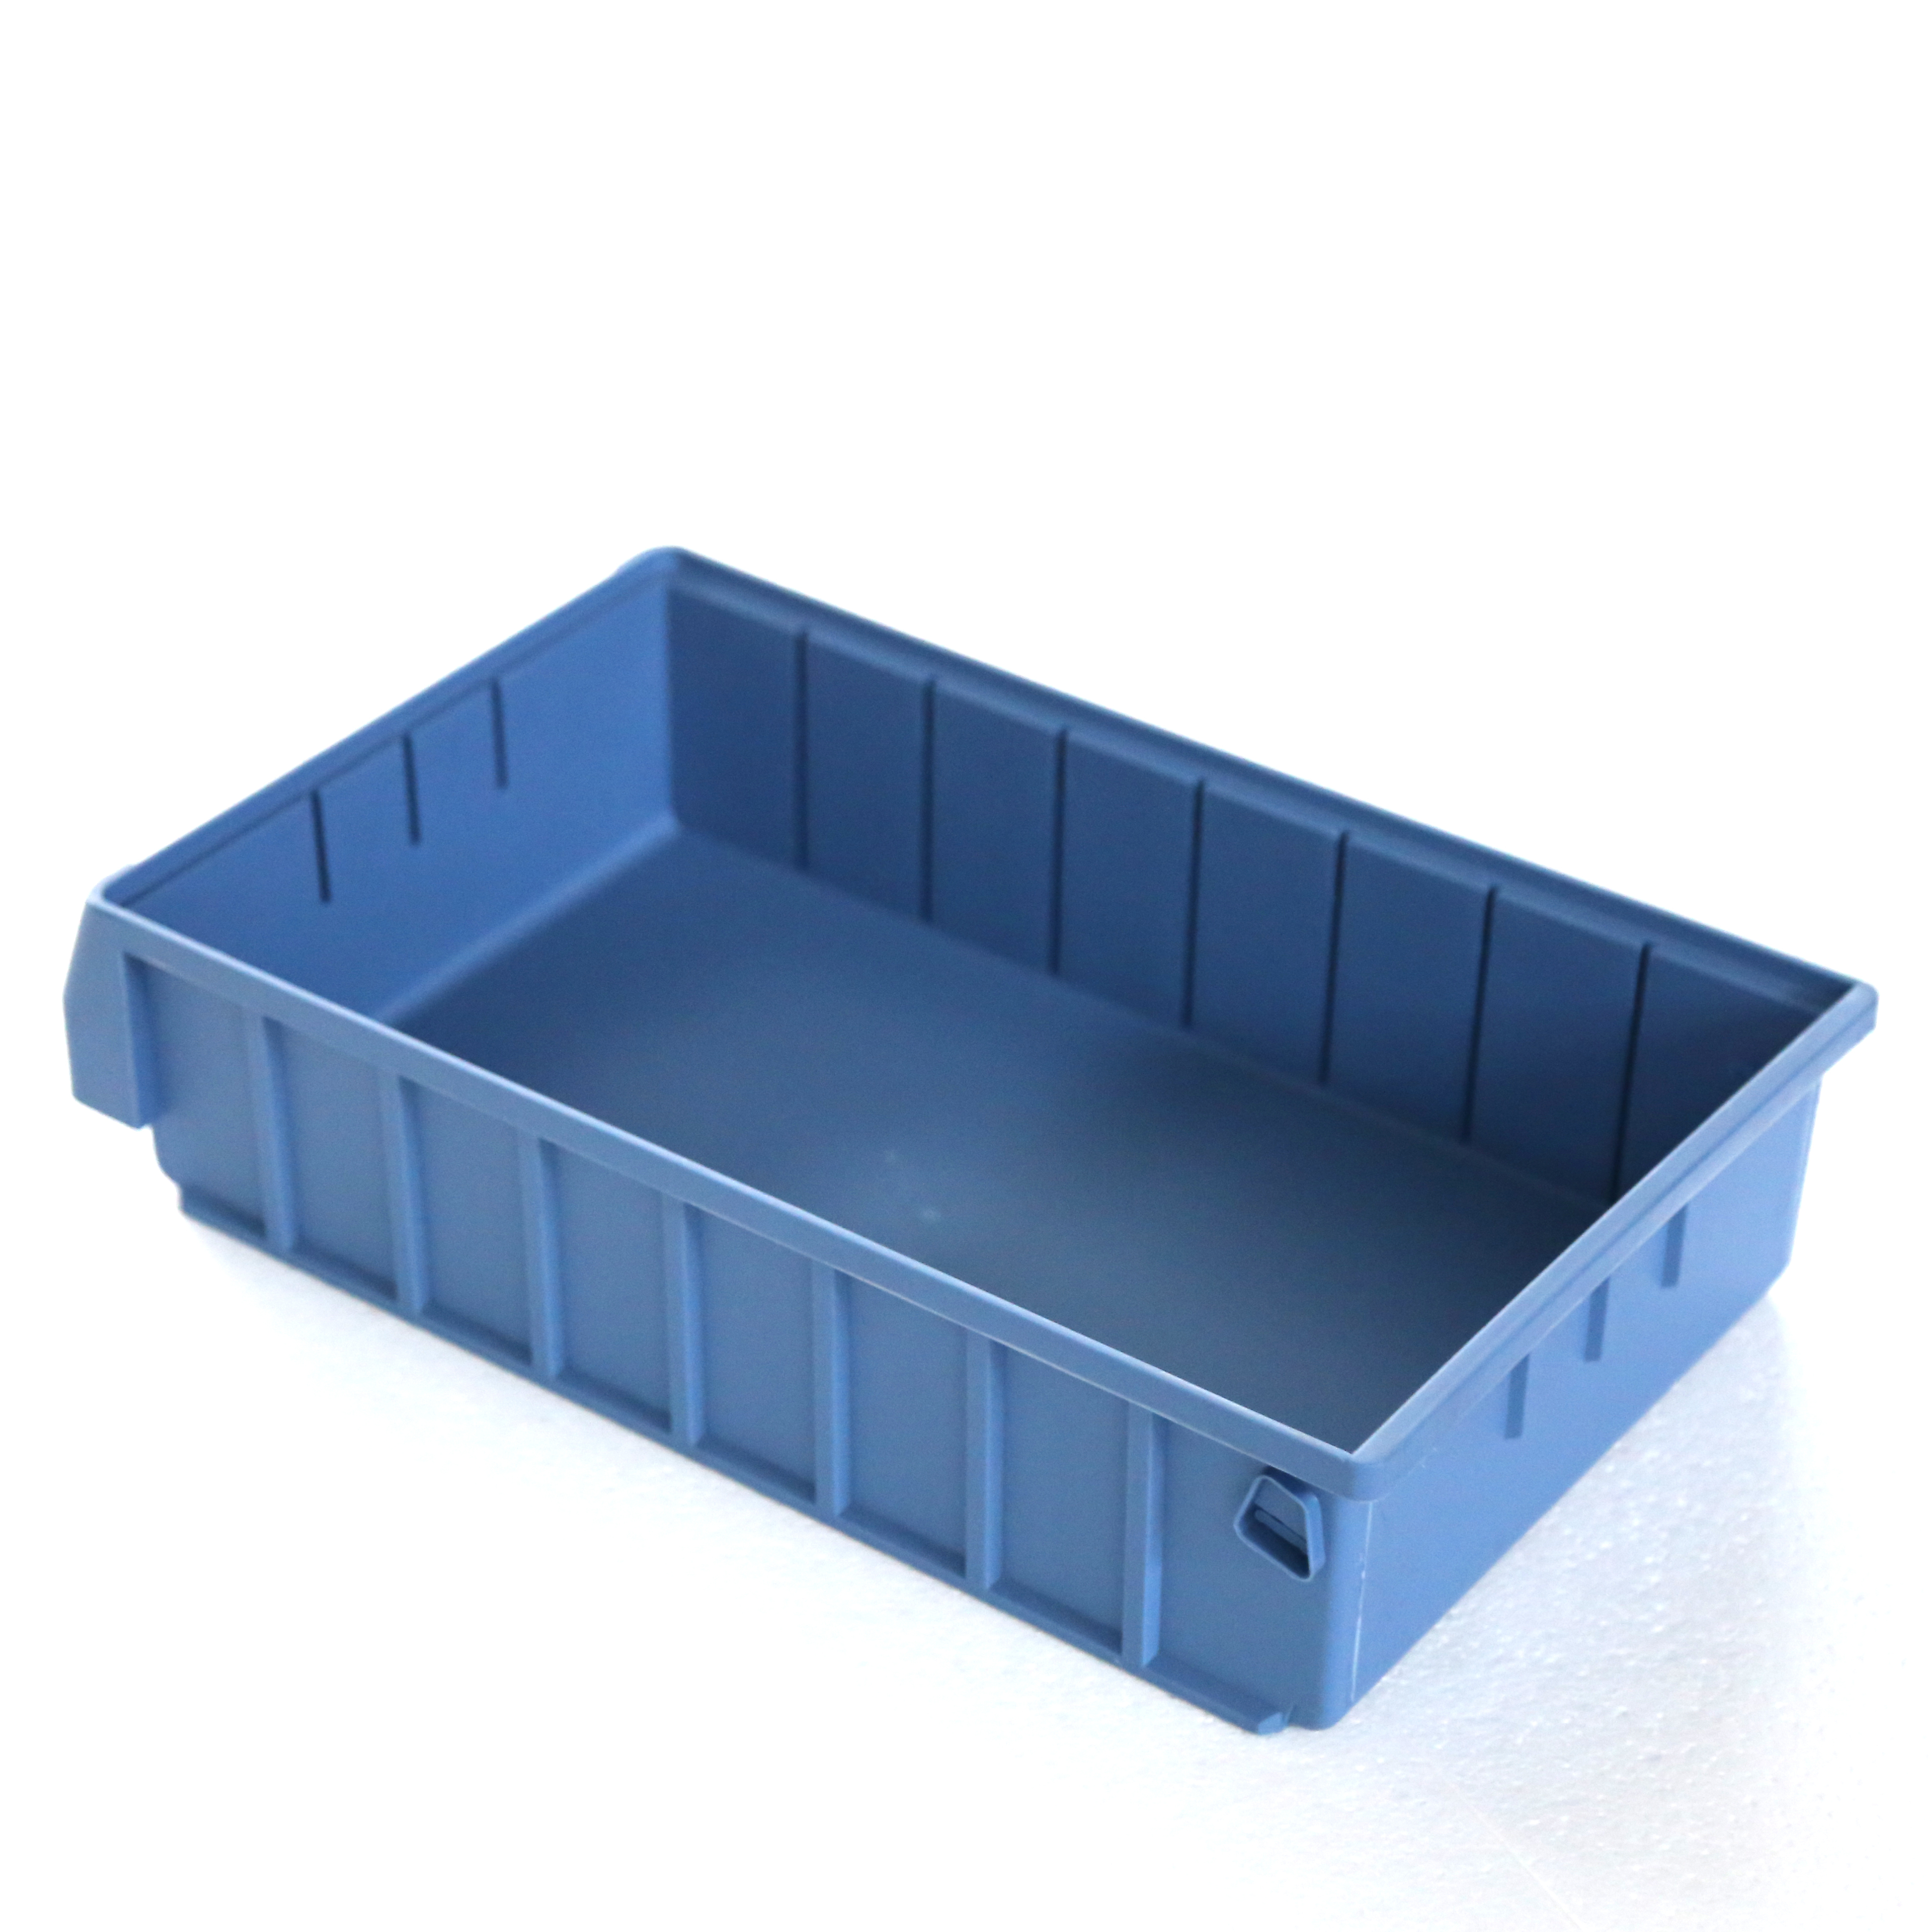 Tjg Rk4214 High Quality Spare Parts Bin Industrial Plastic Storage in sizing 3816 X 3816